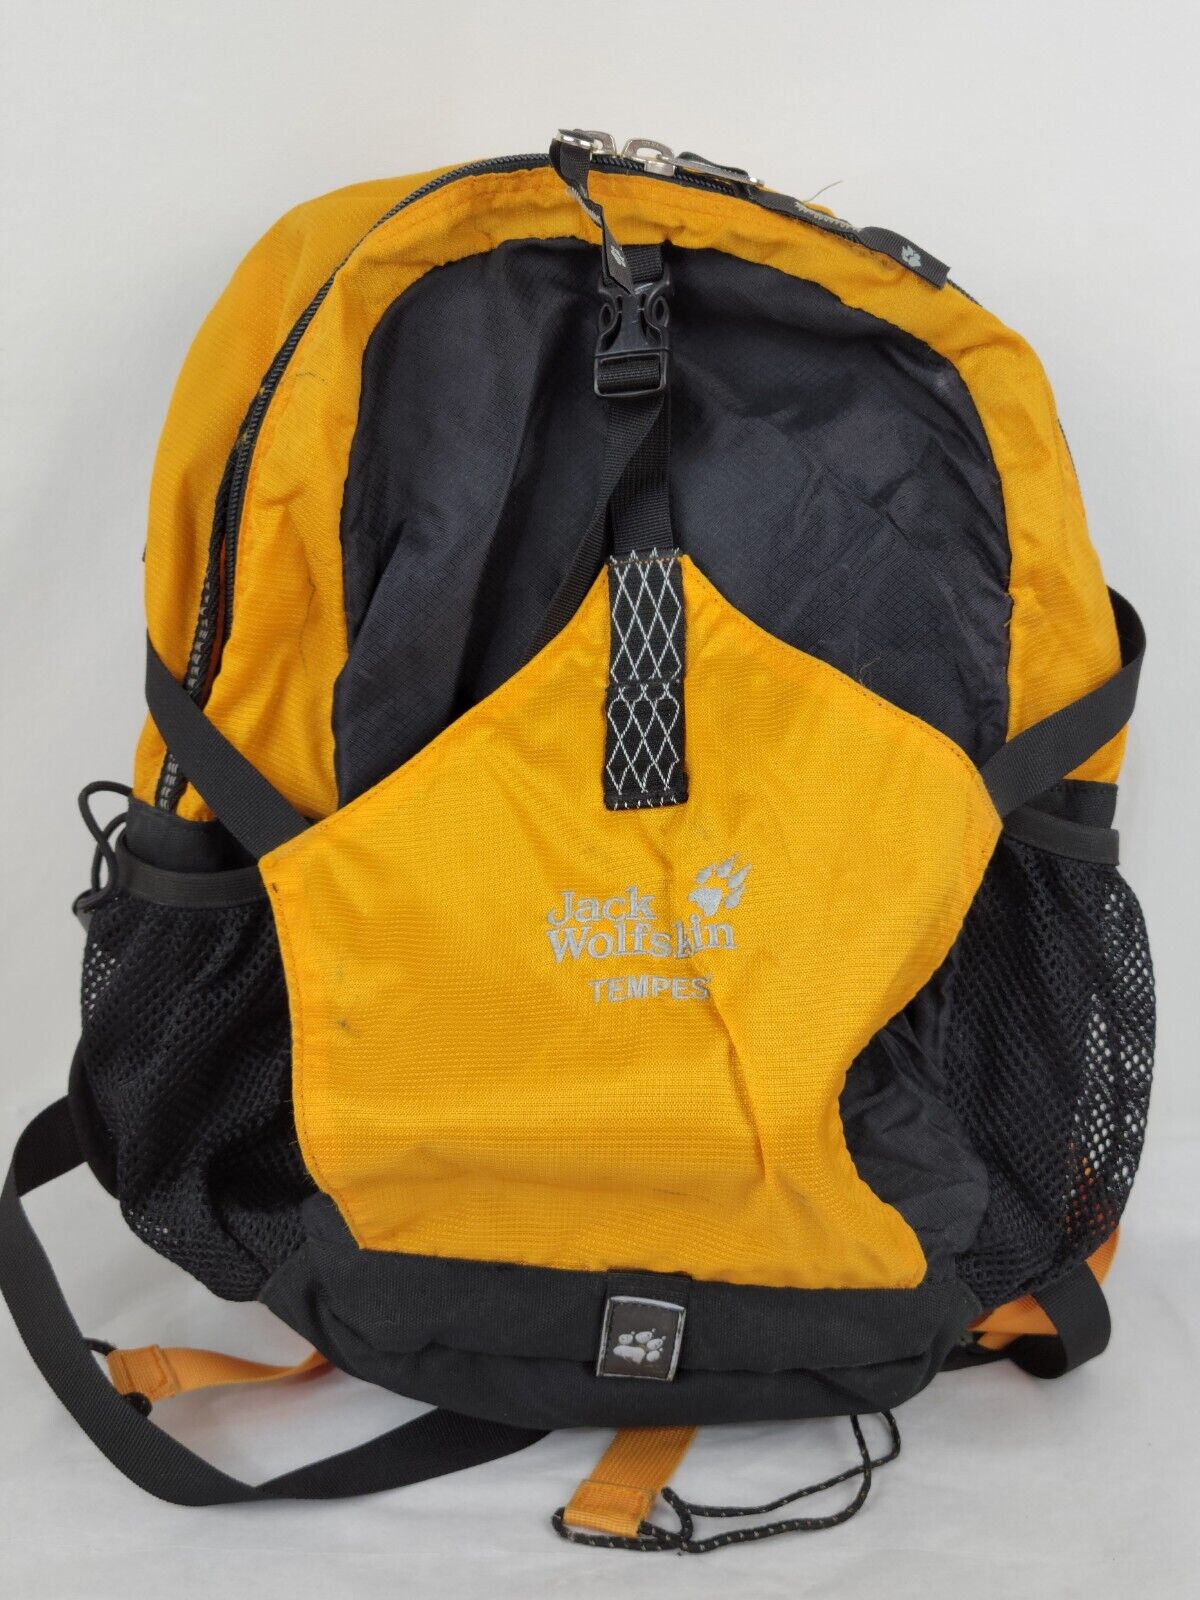 mechanisme motief bungeejumpen Jack Wolfskin Tempest Backpack Daypack Black &amp; Yellow - Good used  condition | eBay